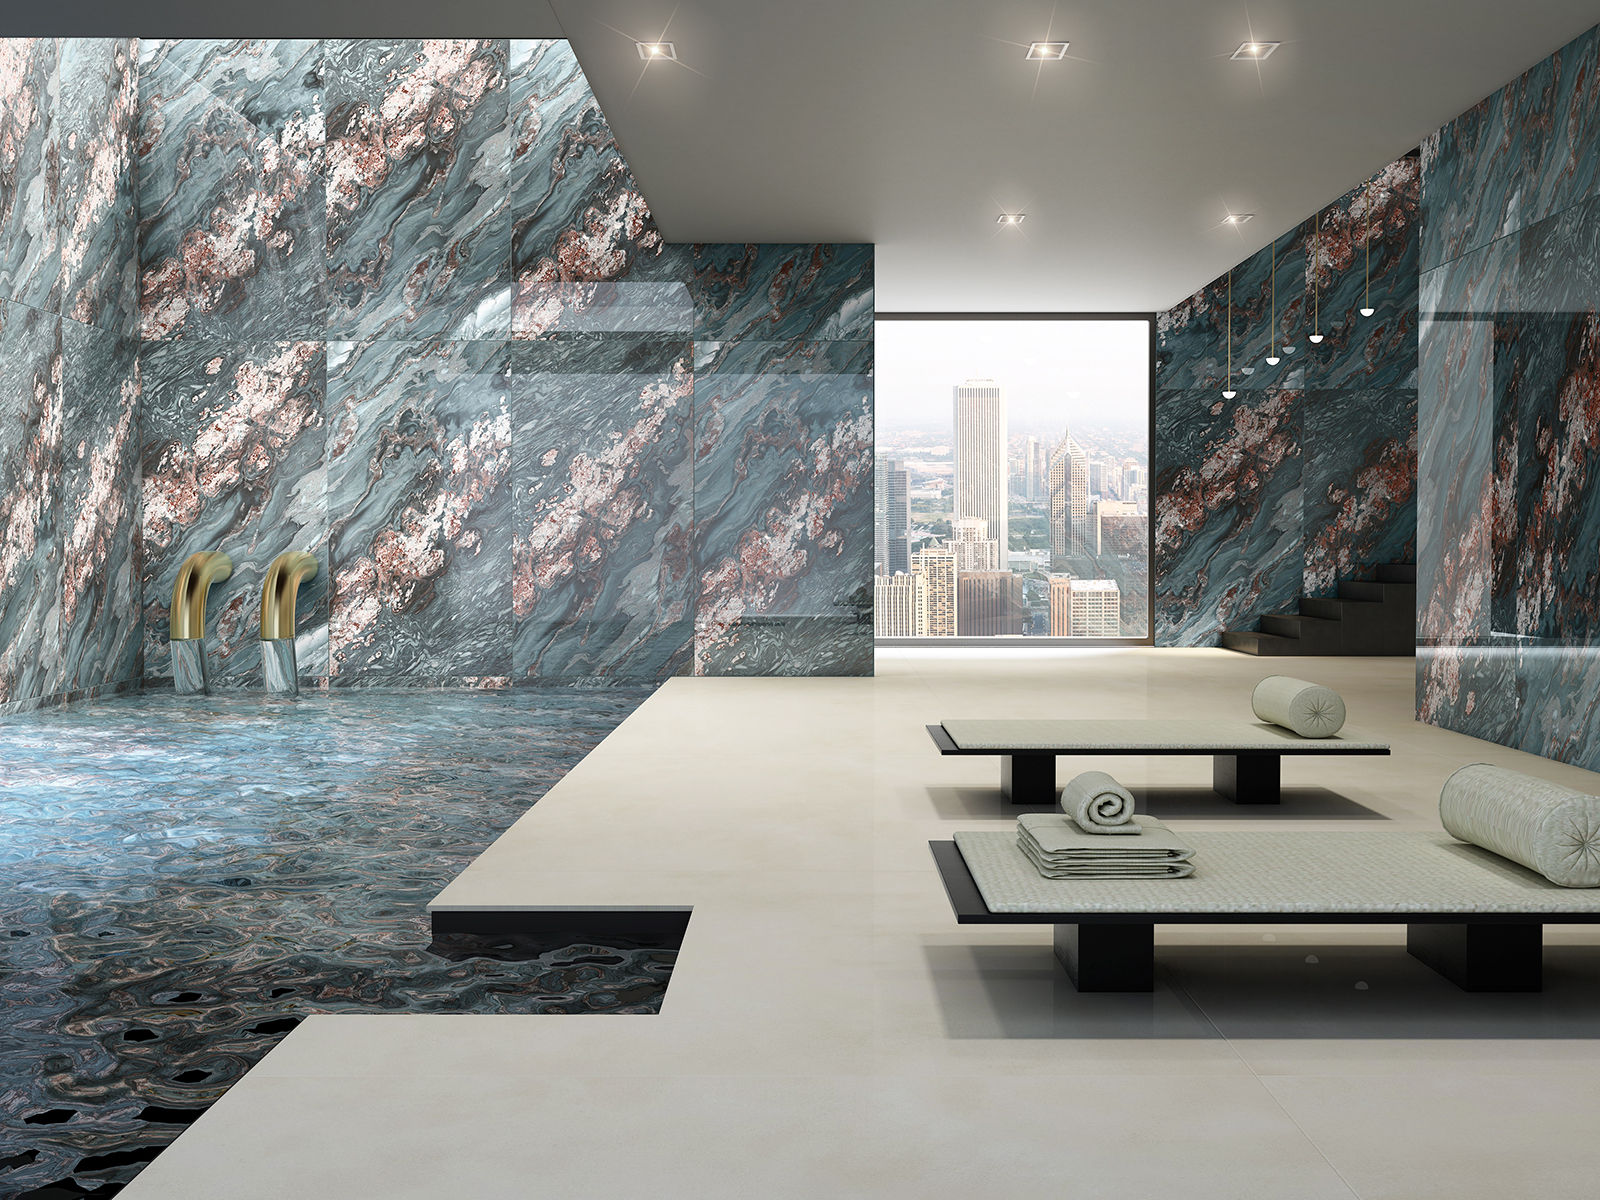 Seron Granito, India's luxury floor tile manufacturer, introduces the